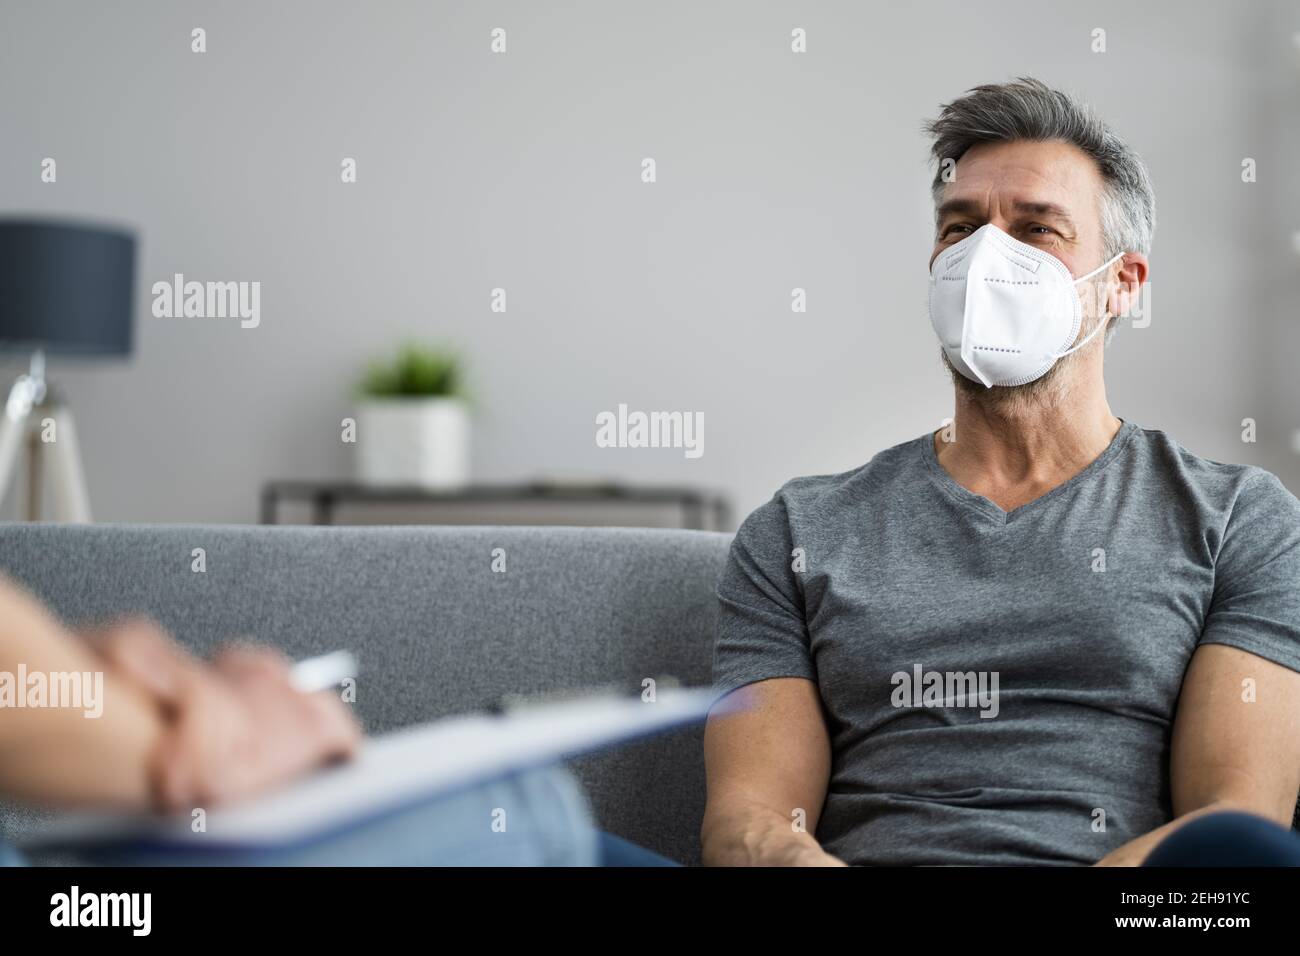 Psychiatrist Or Psychology Psychologist With Clipboard And Face Mask Stock Photo